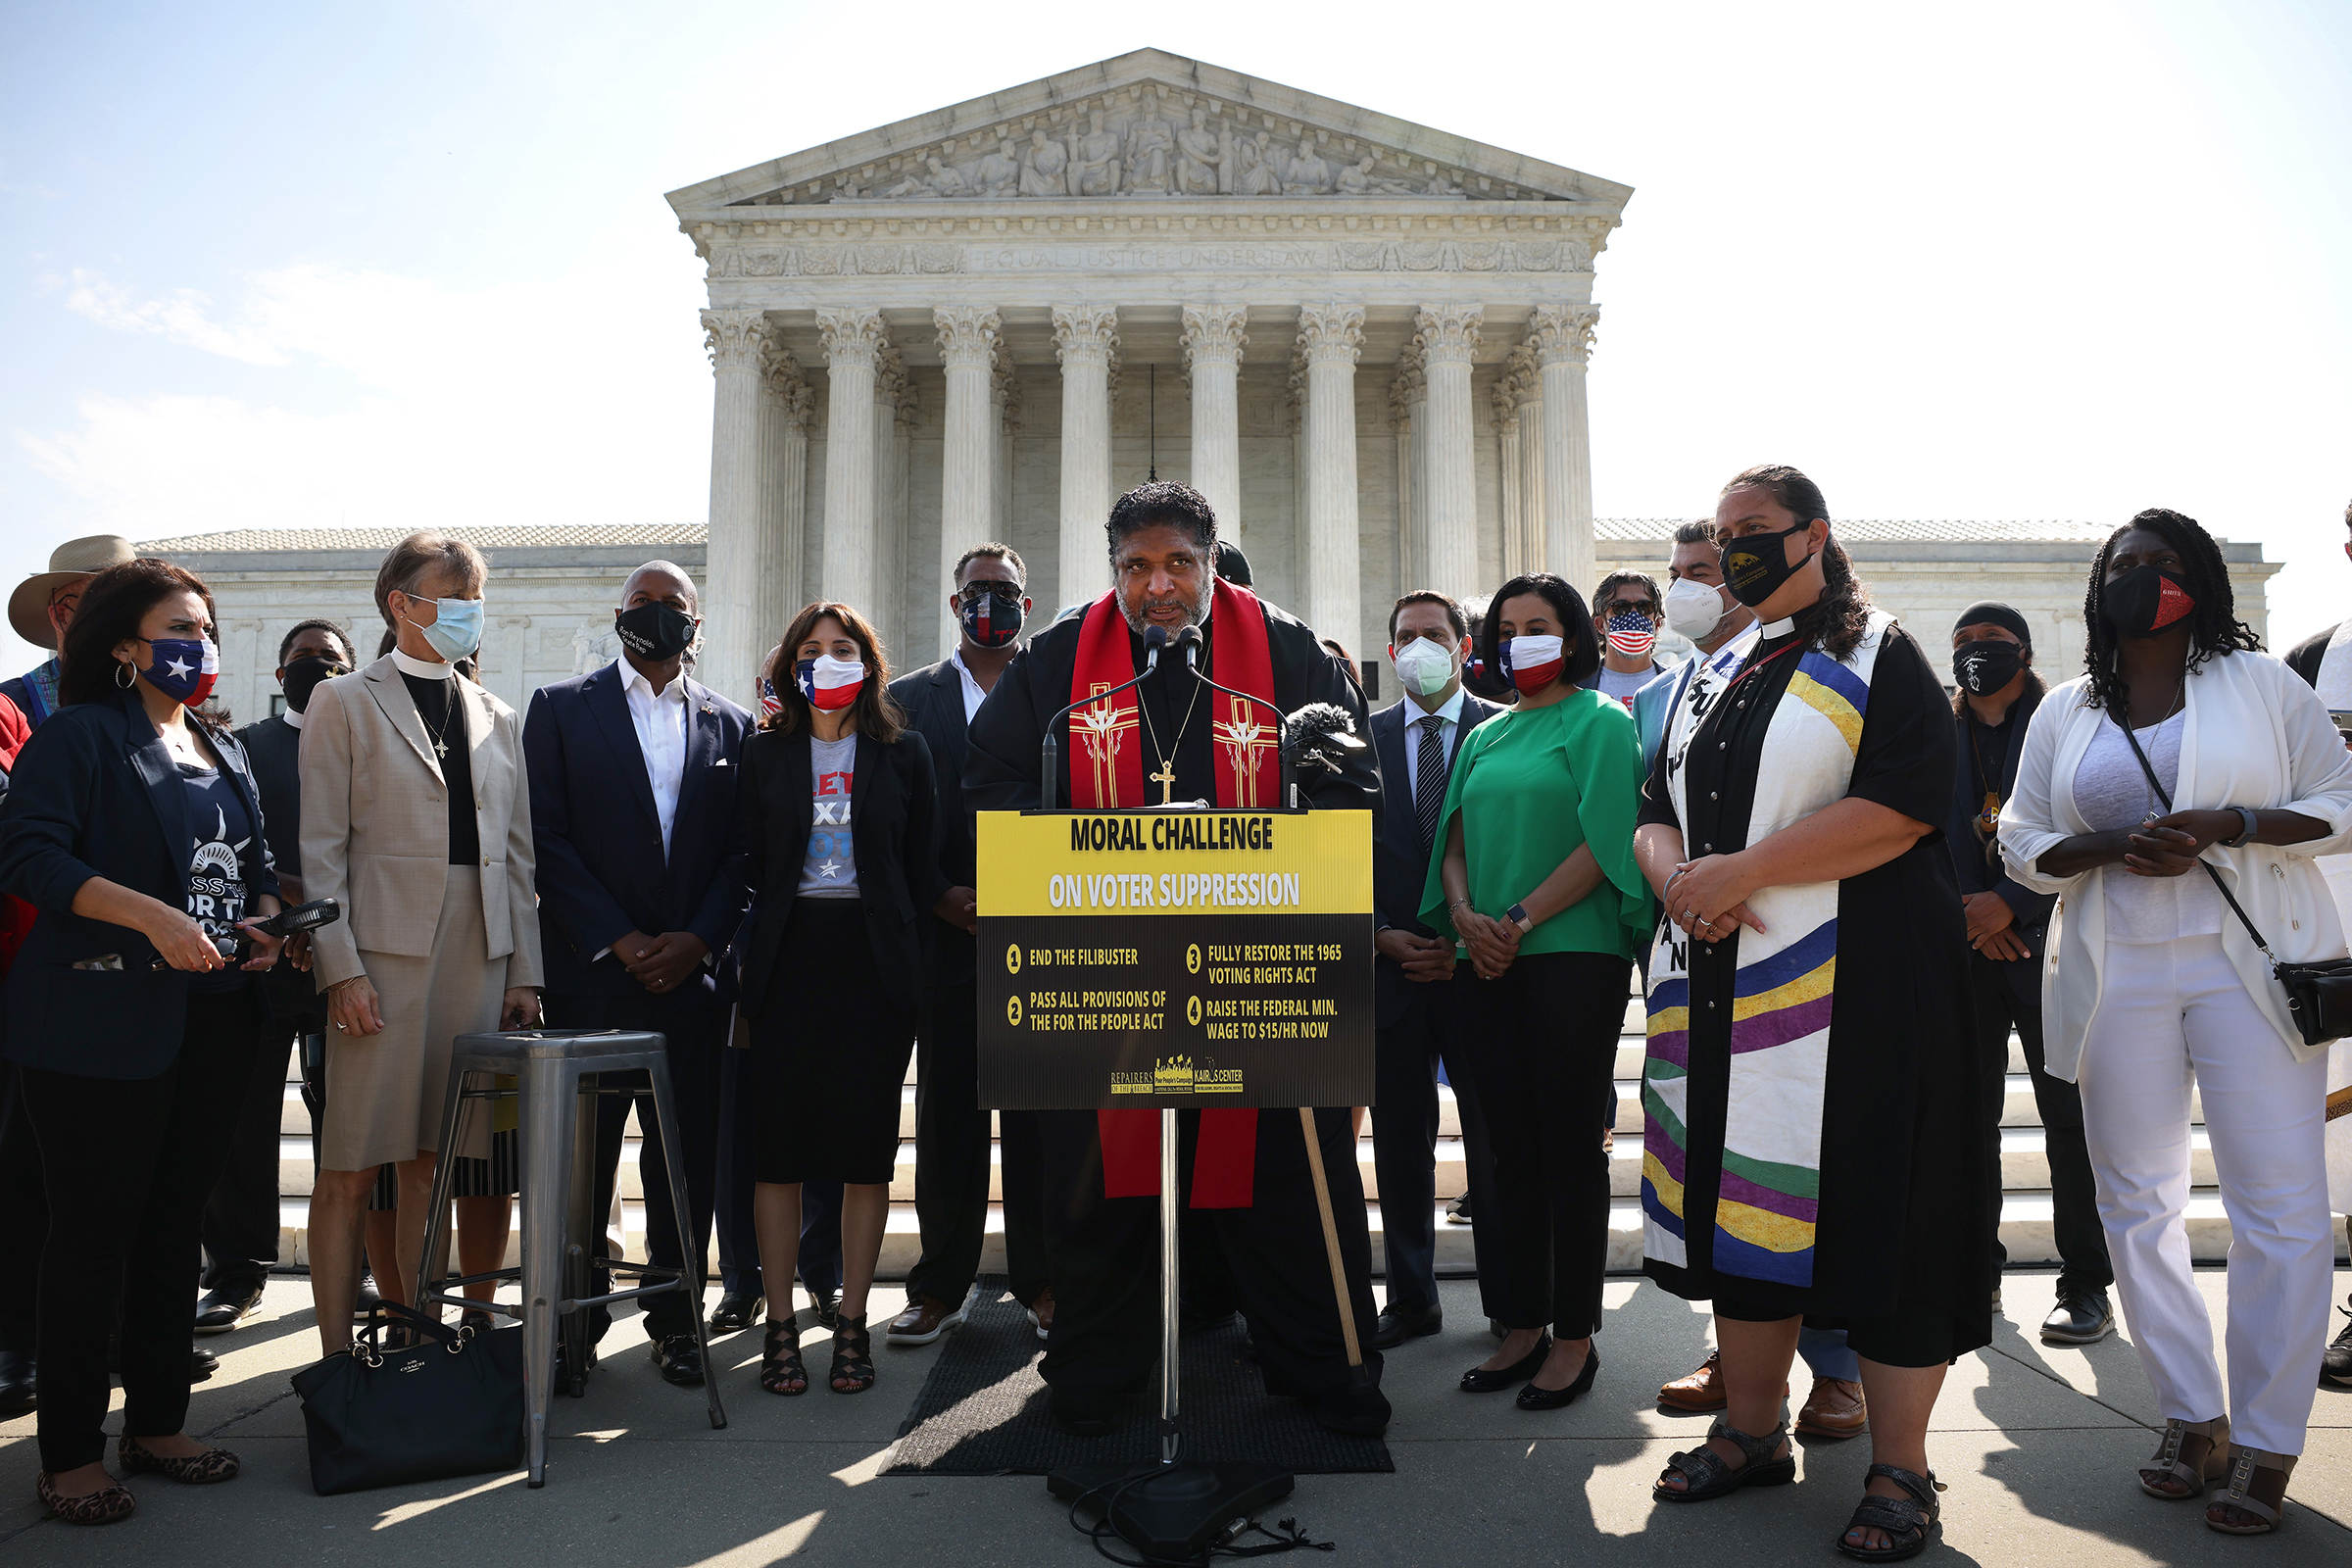 WASHINGTON, DC - AUGUST 12: Rev. William Barber, Co-Chair of the Poor People’s Campaign, speaks alongside Texas State Representatives and fellow religious leaders, as they prepare to deliver a petition to Senate Majority Leader Charles Schumer calling for an end to the filibuster, the passage of the For The People Act and restoring the Voting Rights Act, at the U.S. Supreme Court on August 12, 2021 in Washington, DC. (Photo by Kevin Dietsch/Getty Images) (Getty Images—2021 Getty Images)